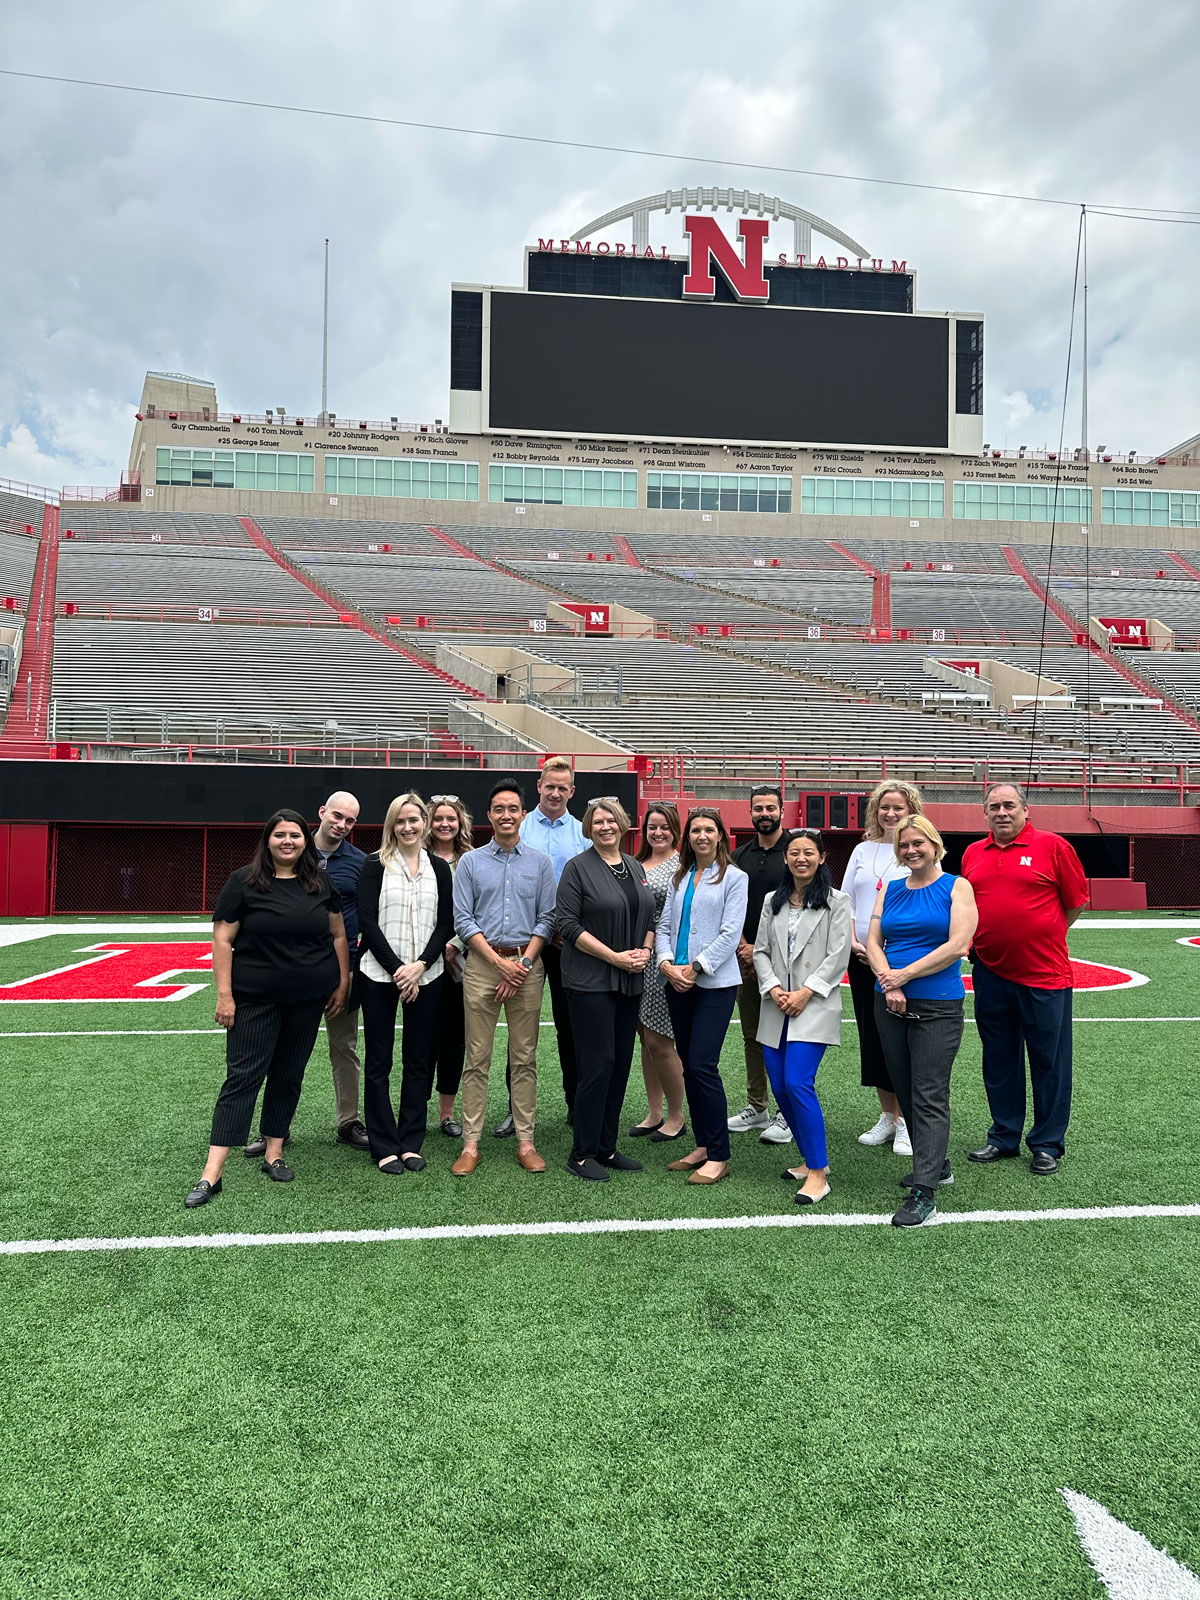 A group of 14 people pose for a photo in the end zone of Memorial Stadium. 